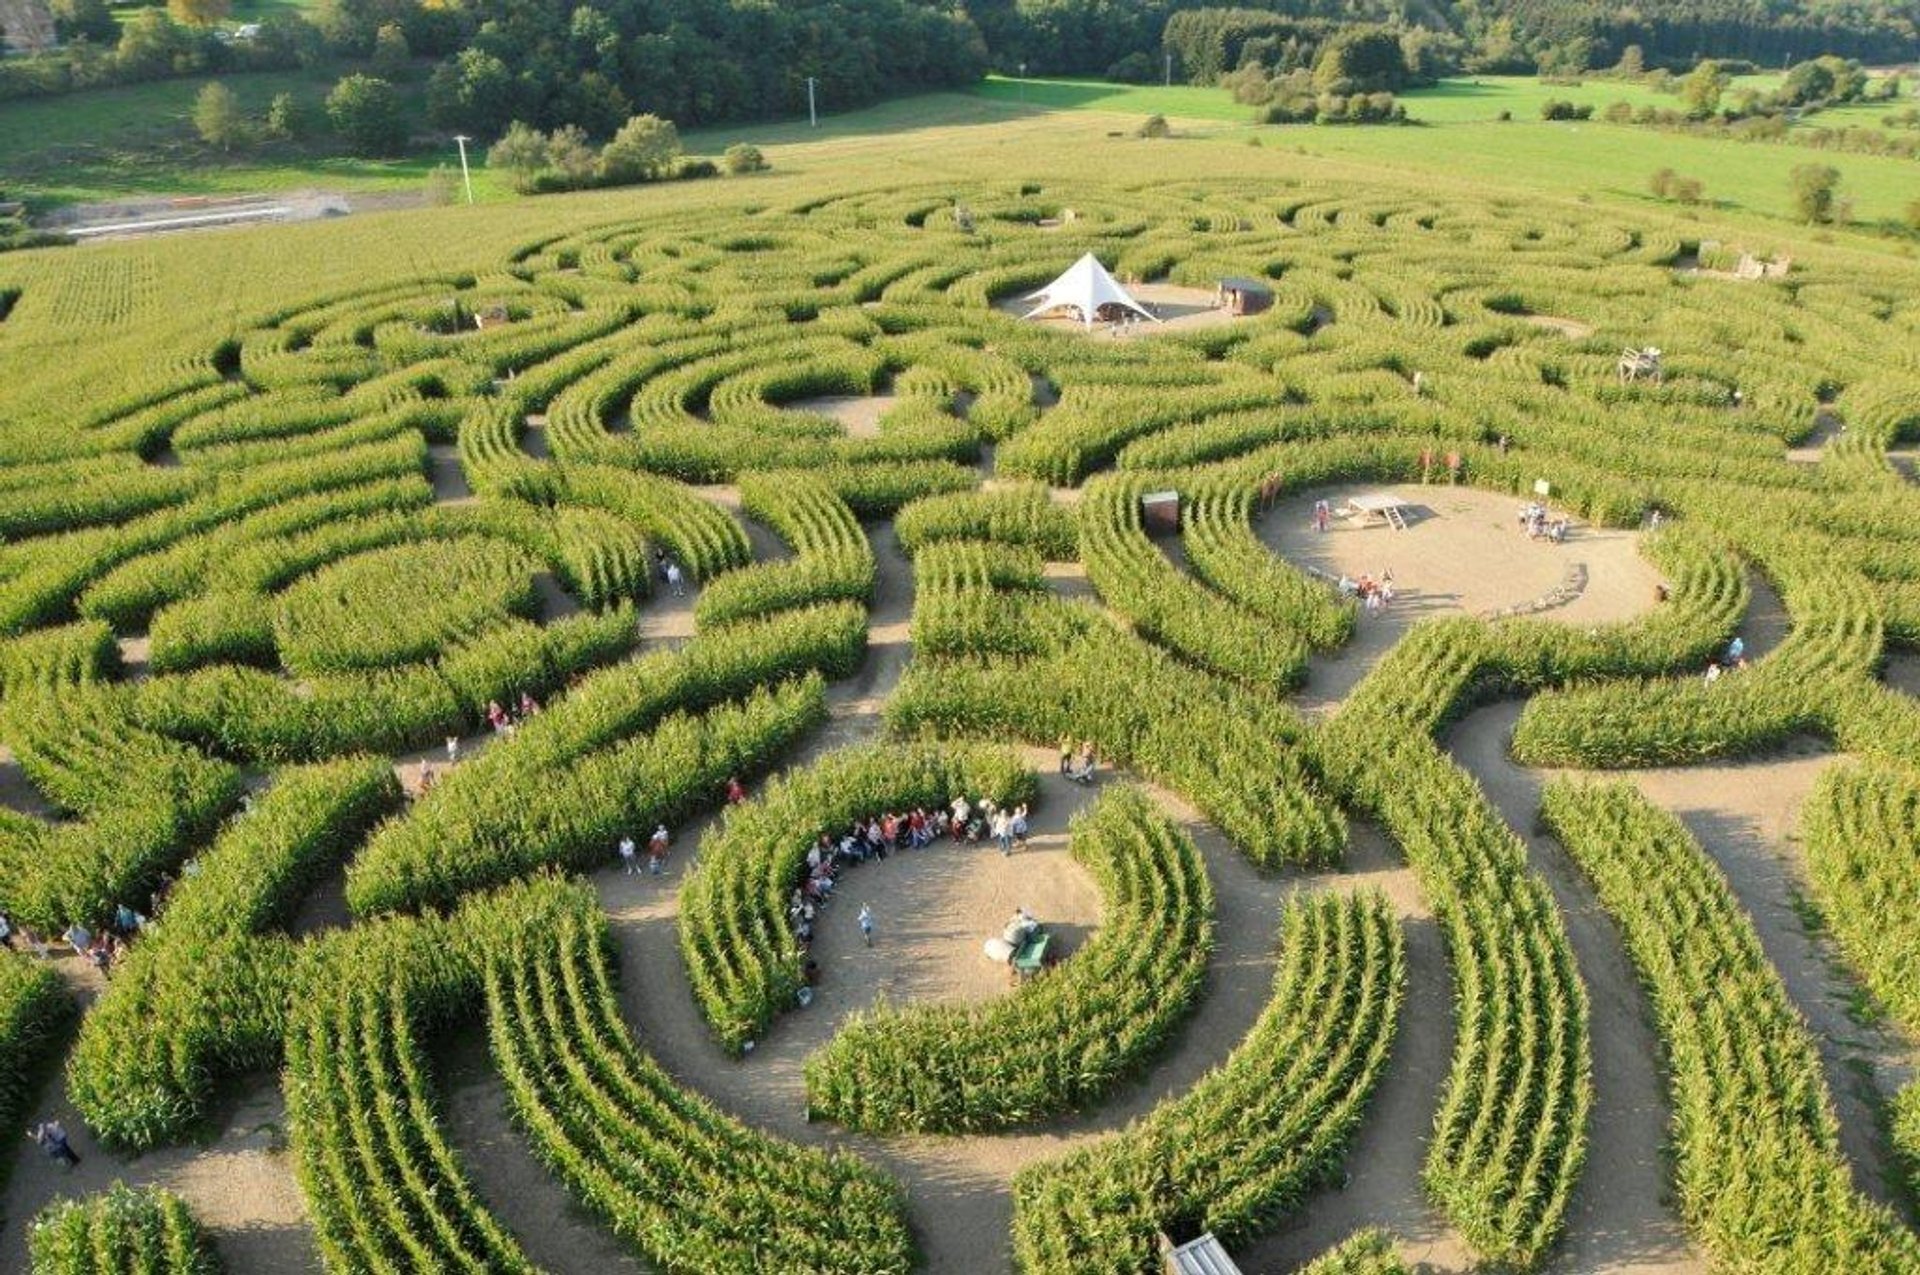 The Labyrinth of Durbuy